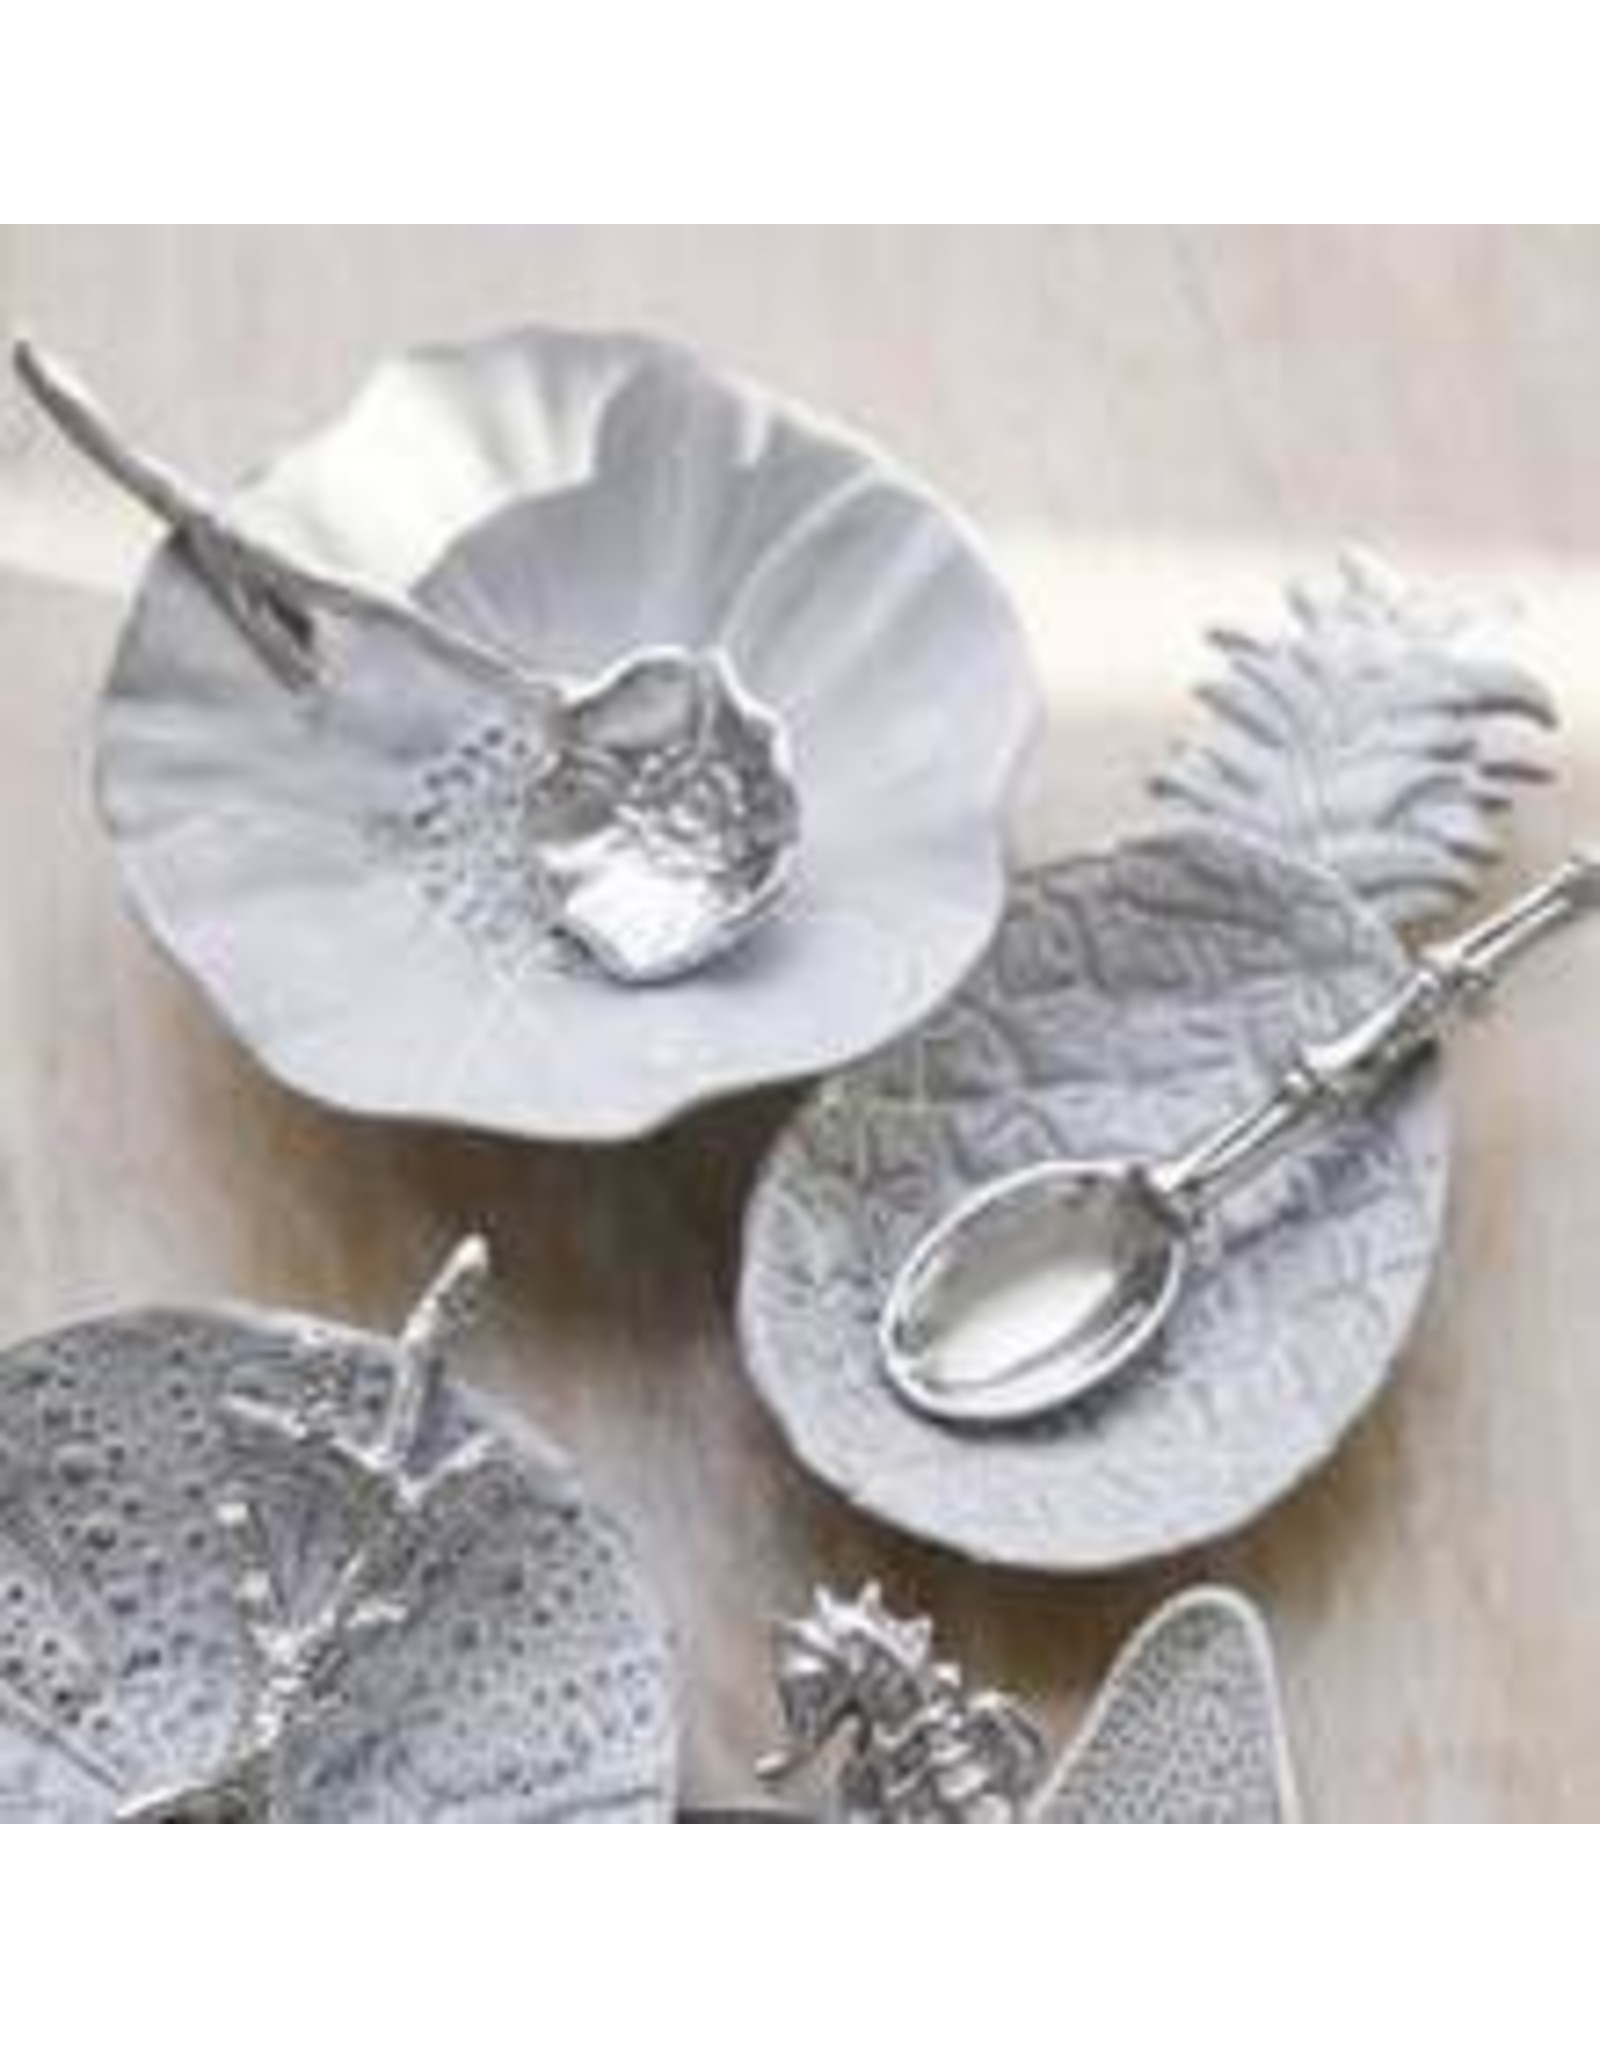 Mariposa Canape Plate w/Spoon